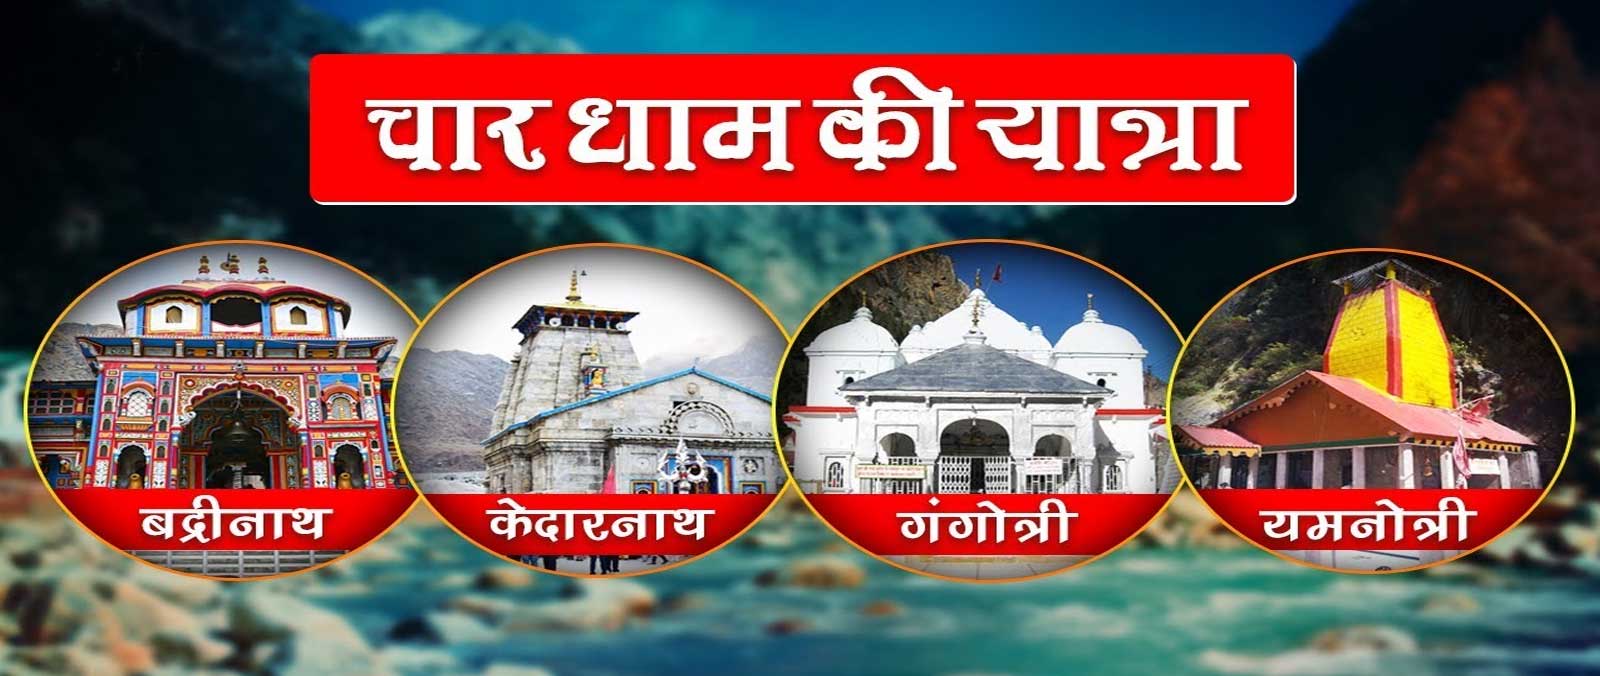 Char Dham Yatra tour packages, tours package rajasthan